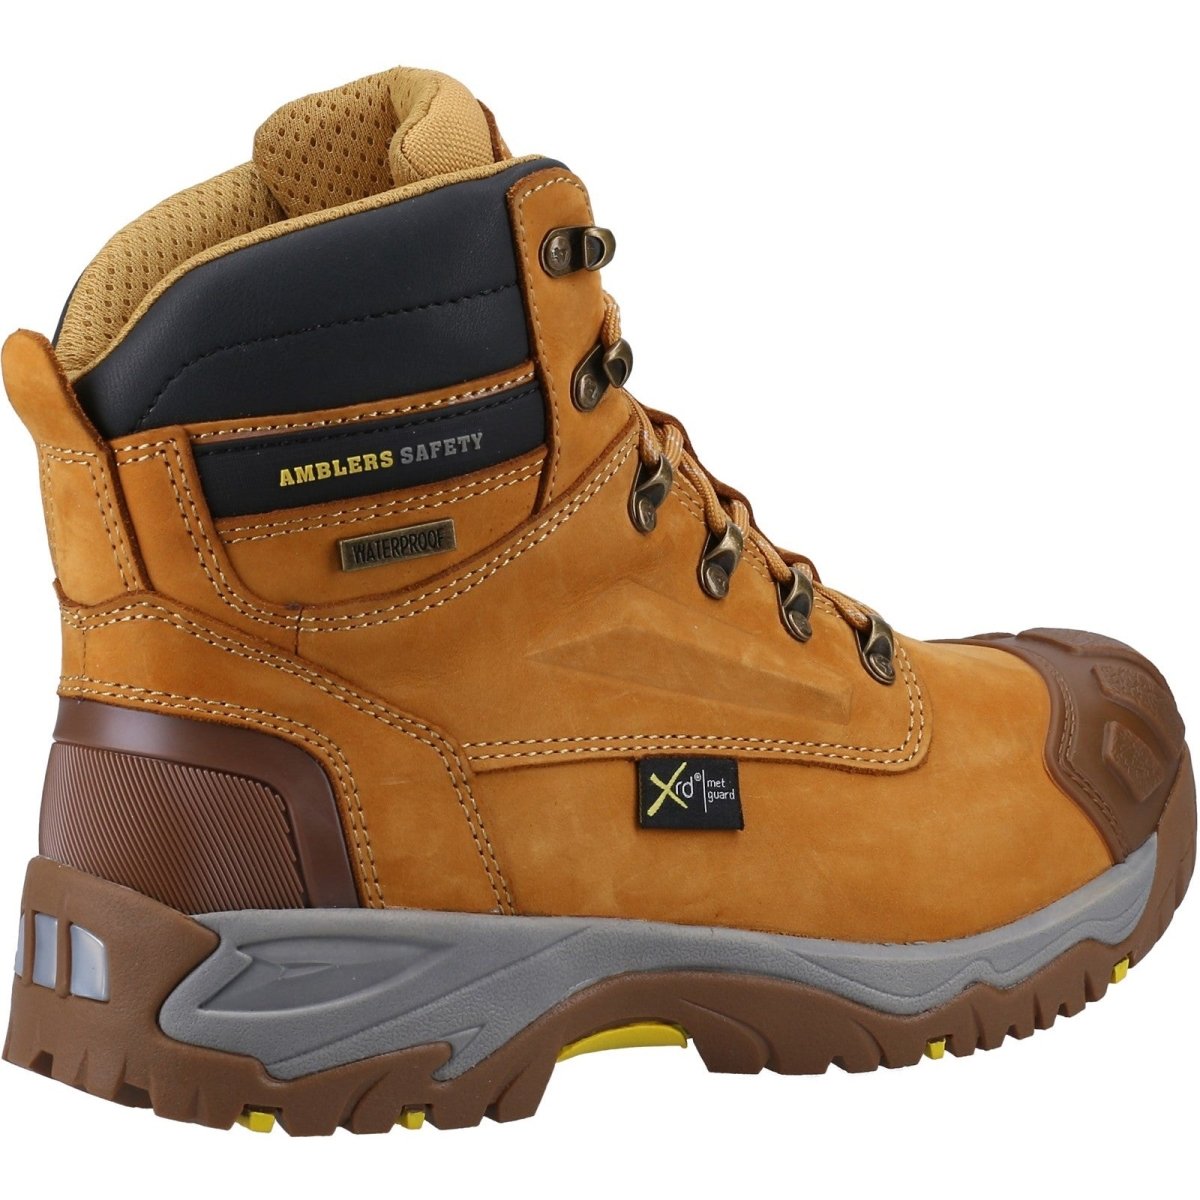 Amblers Safety AS986 Boots - Shoe Store Direct